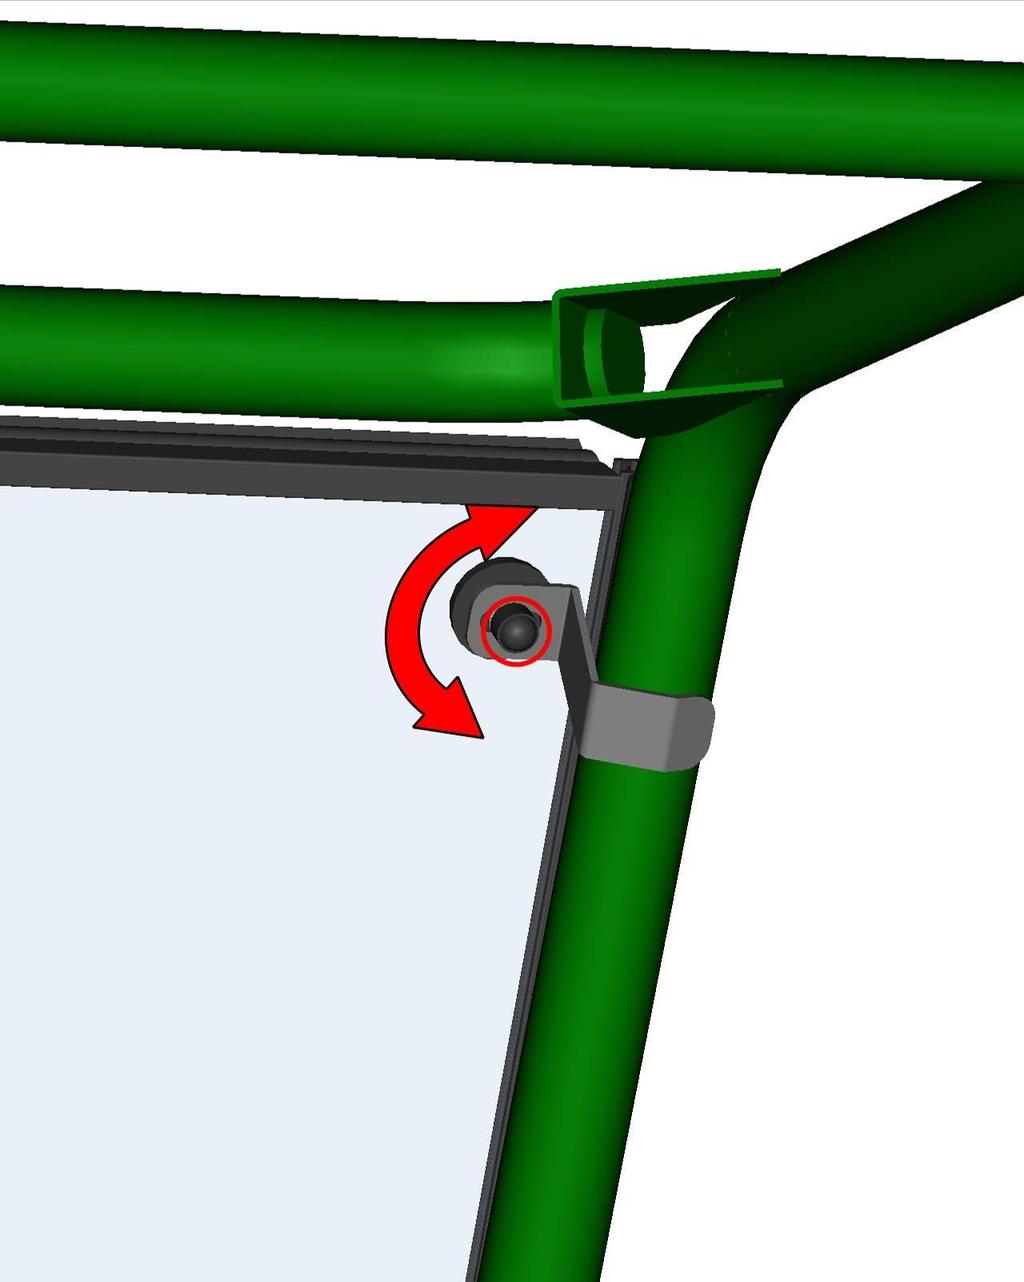 Turn the front panel upper holder to the correct position